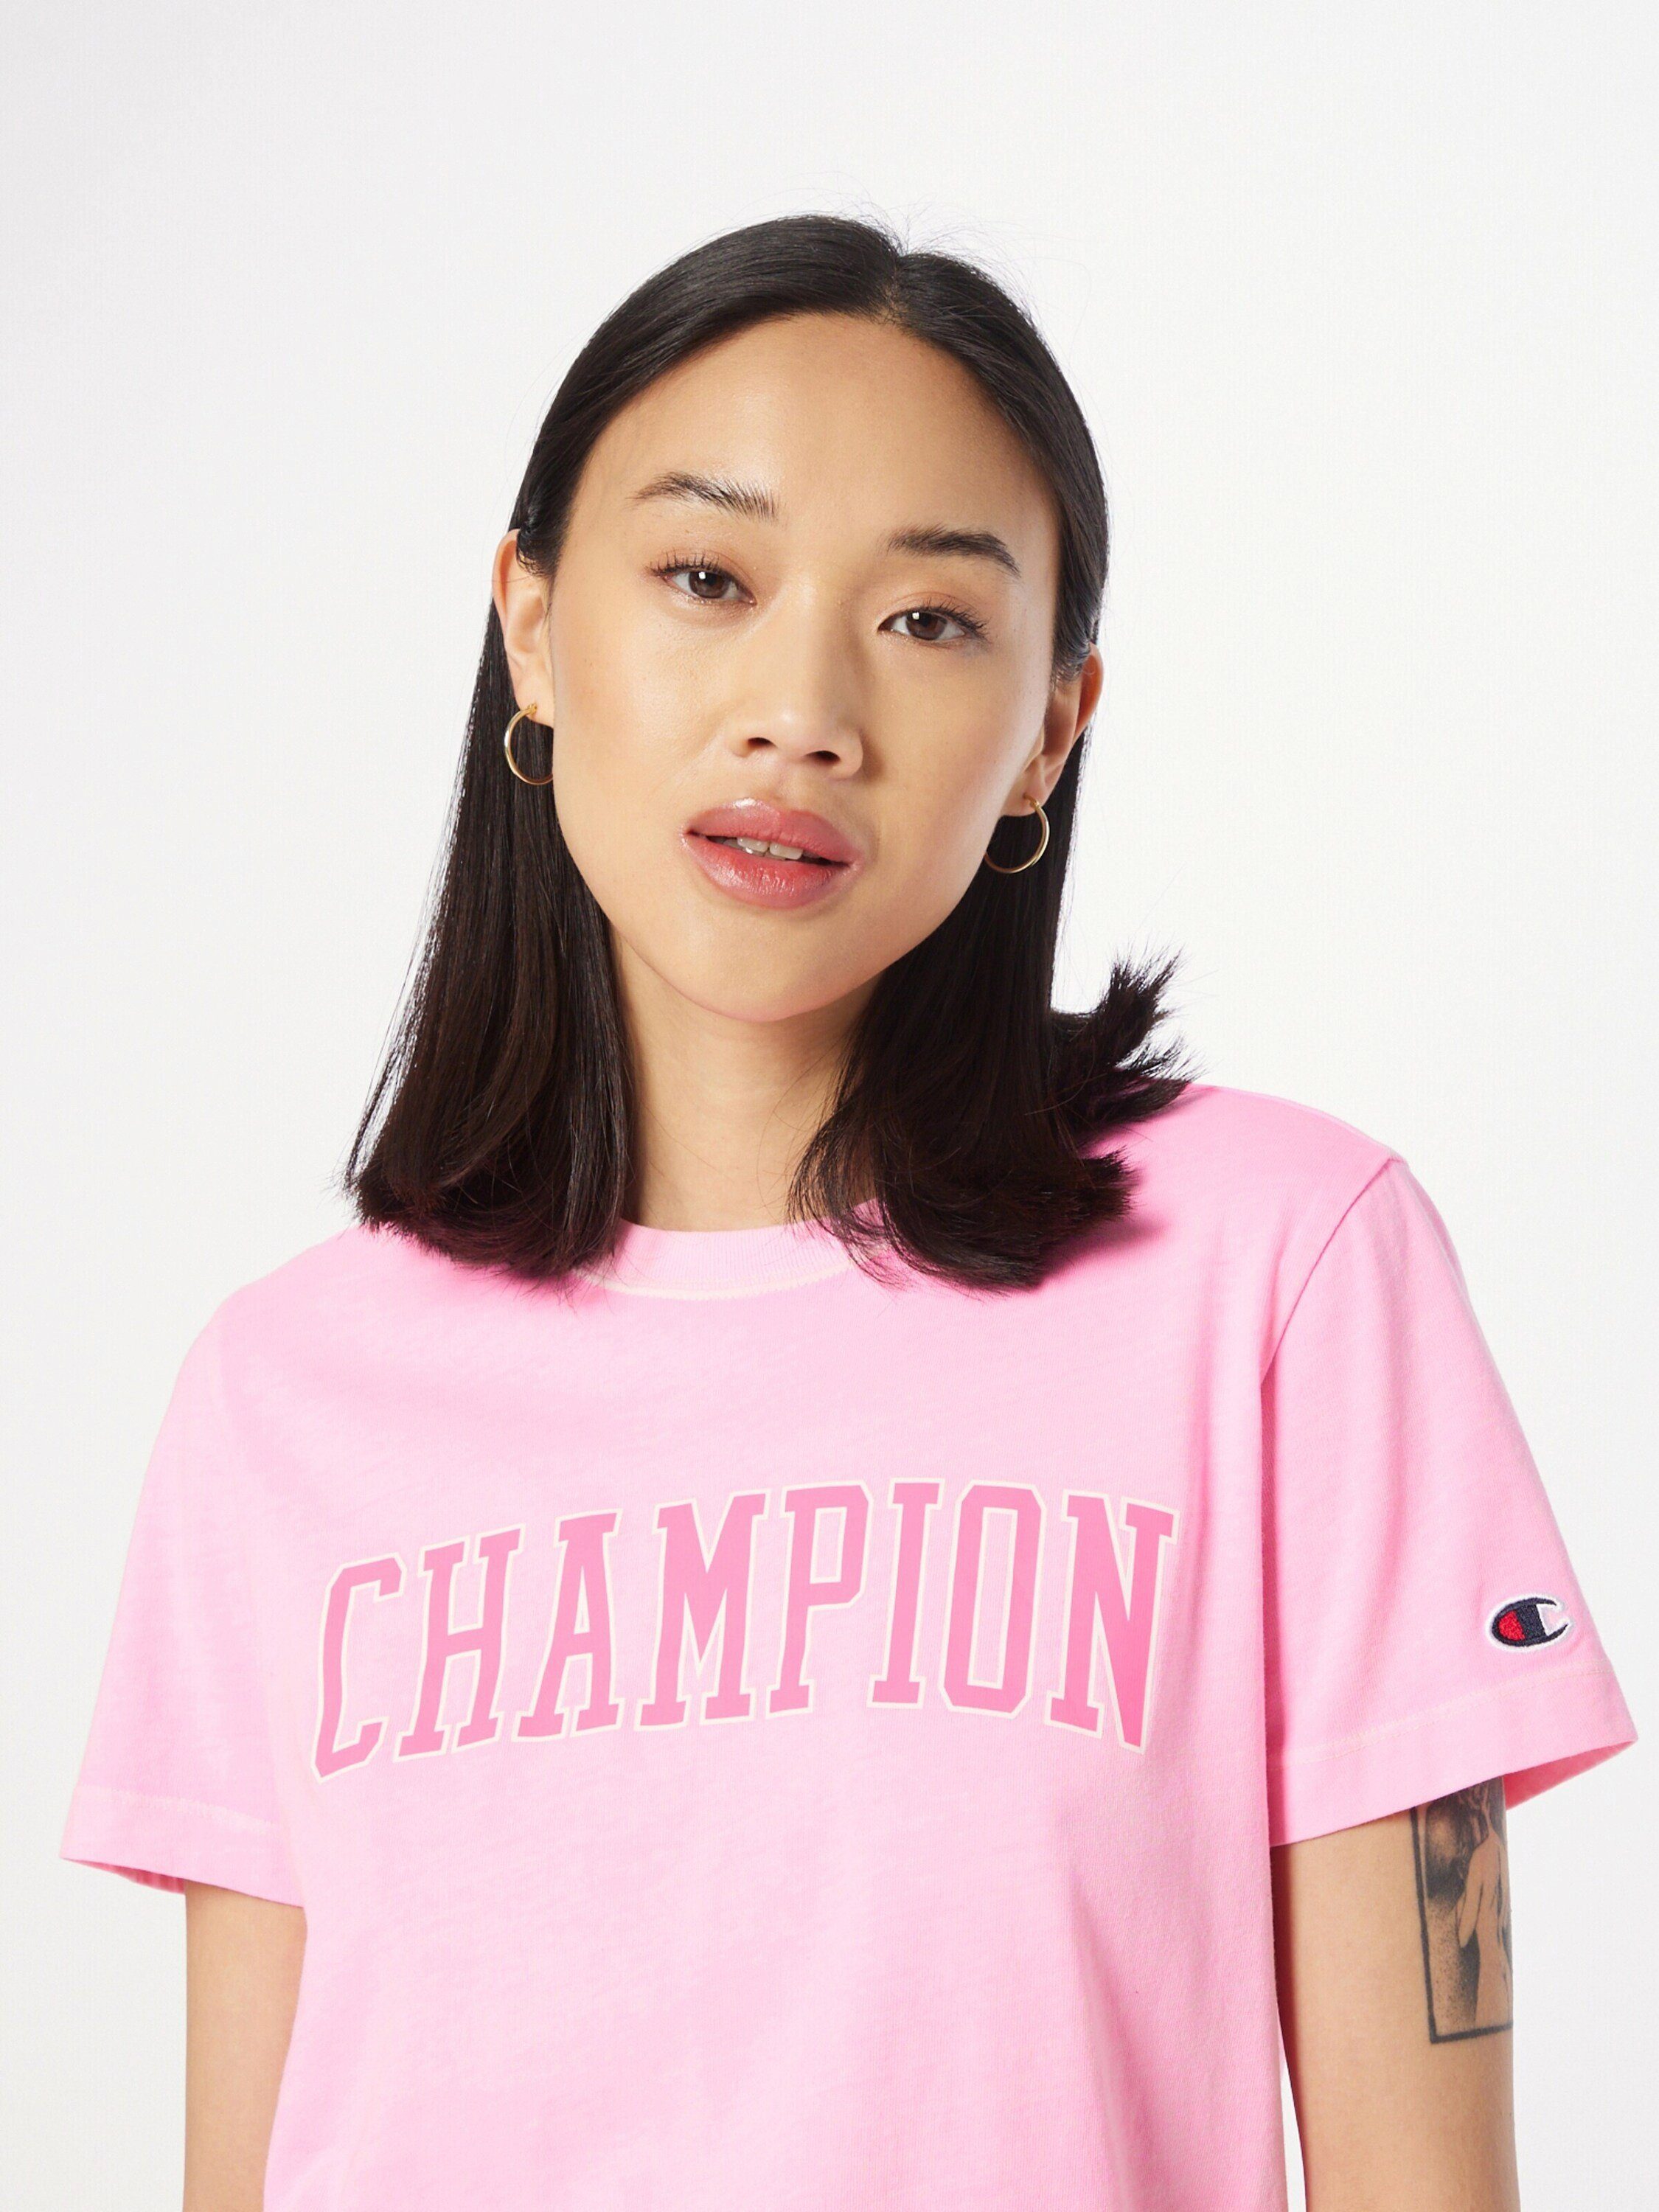 Weiteres Authentic T-Shirt (1-tlg) Apparel Athletic Detail Champion CCPF